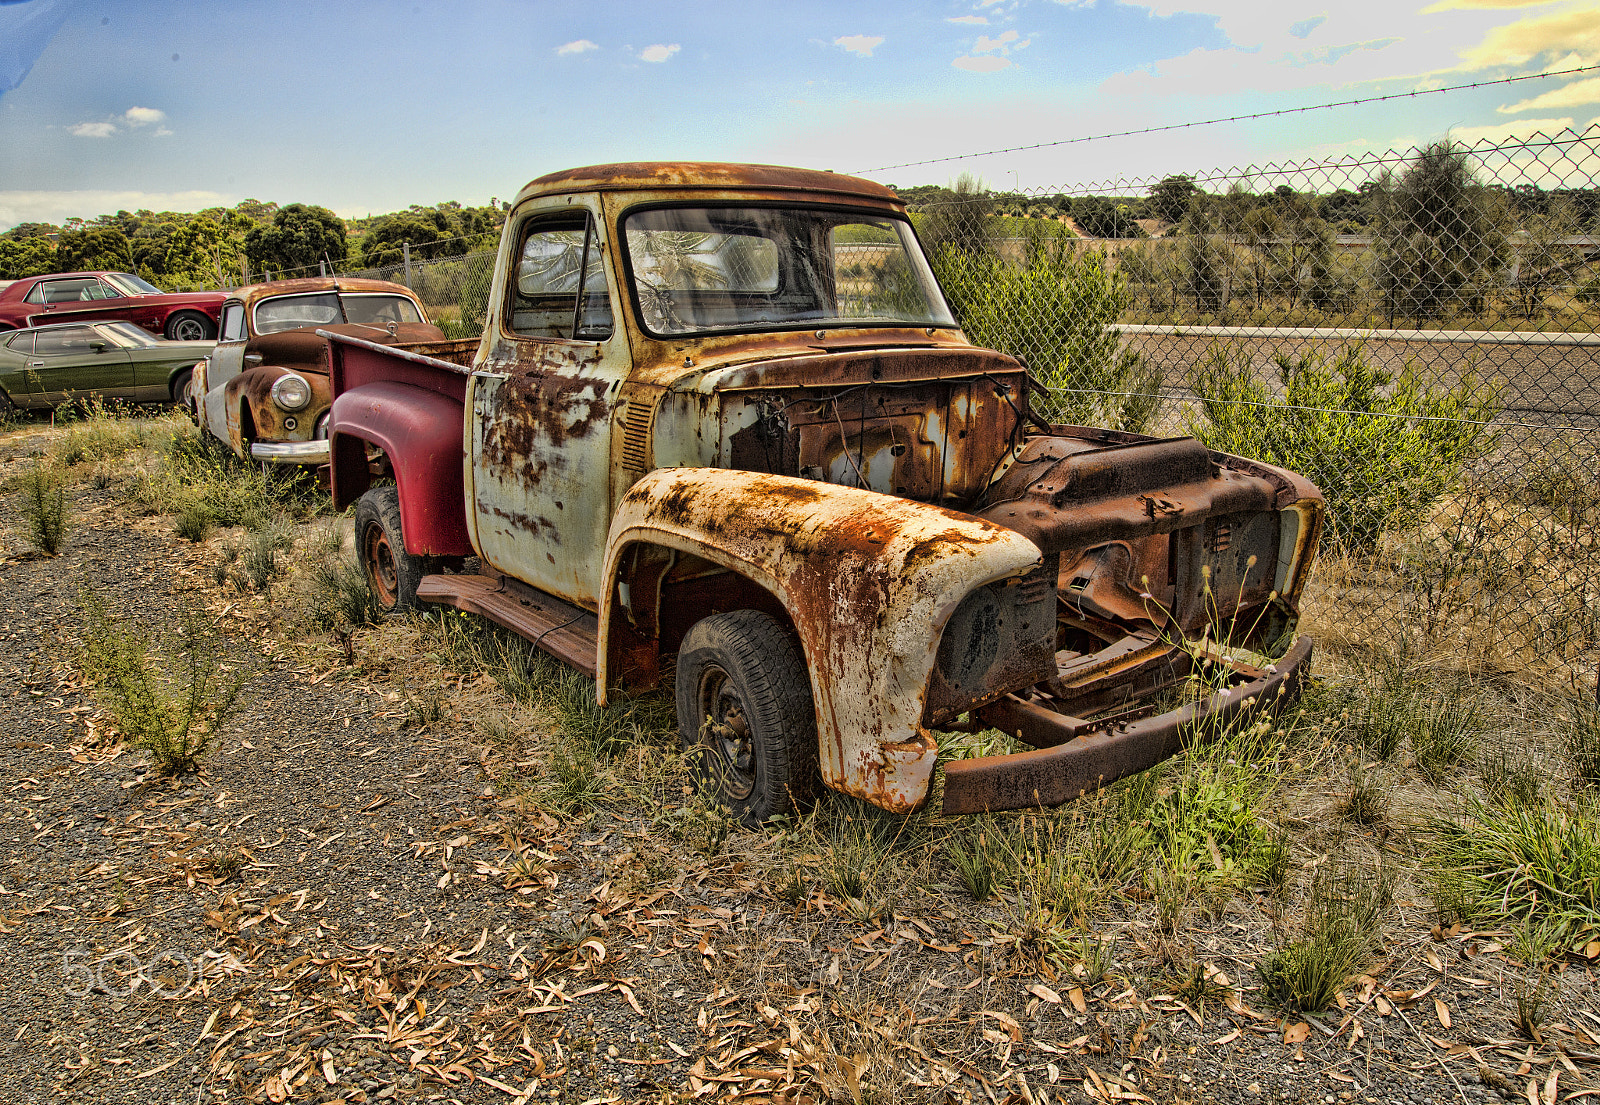 Canon EOS 6D + Sigma 24-105mm f/4 DG OS HSM | A sample photo. Rusty ute 1 photography